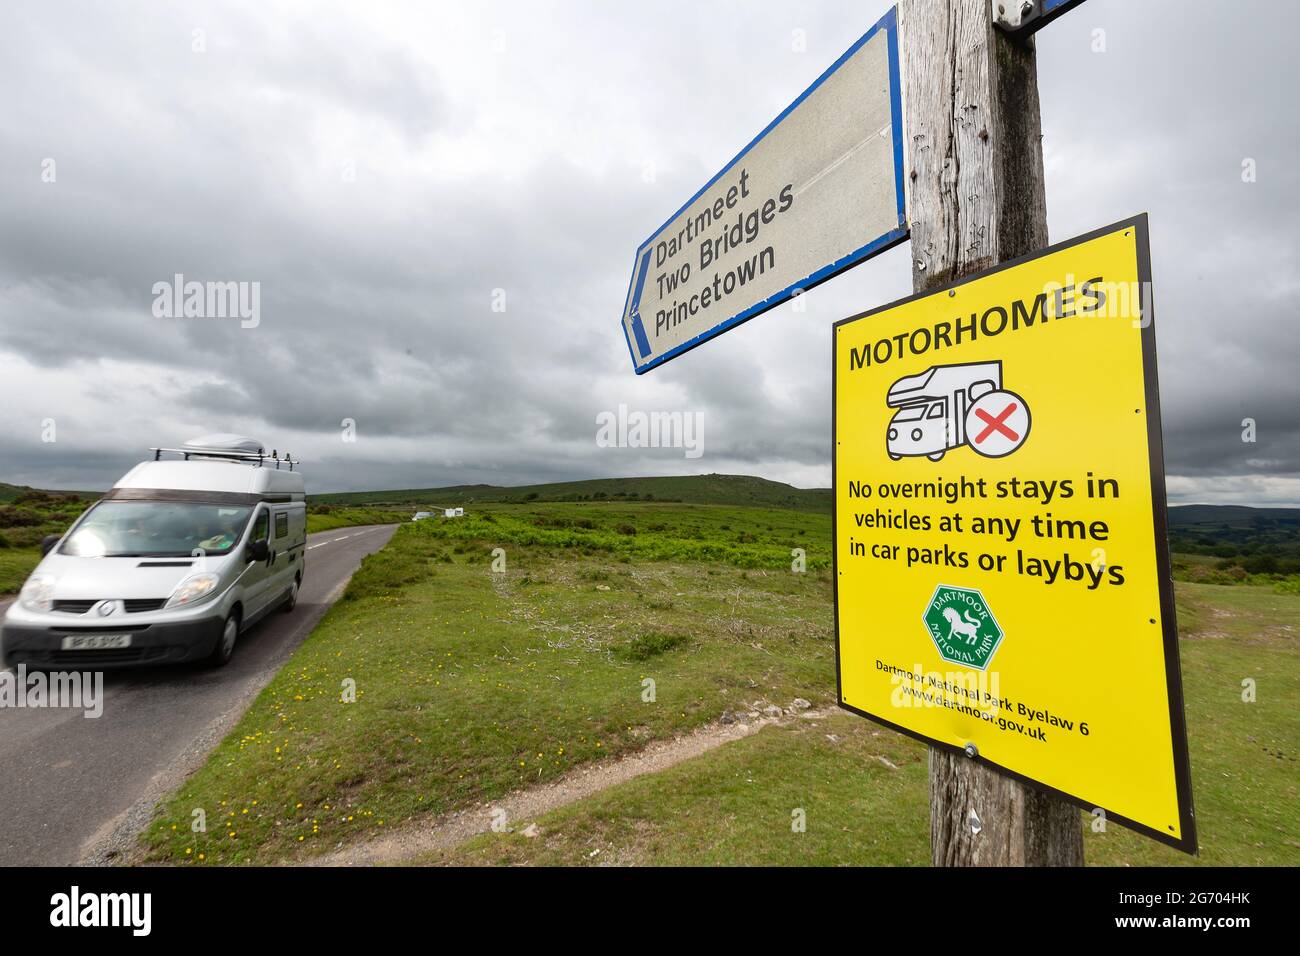 A motorhome pictured travelling along a rural road through Dartmoor National Park in Devon, UK past a sign. Stock Photo